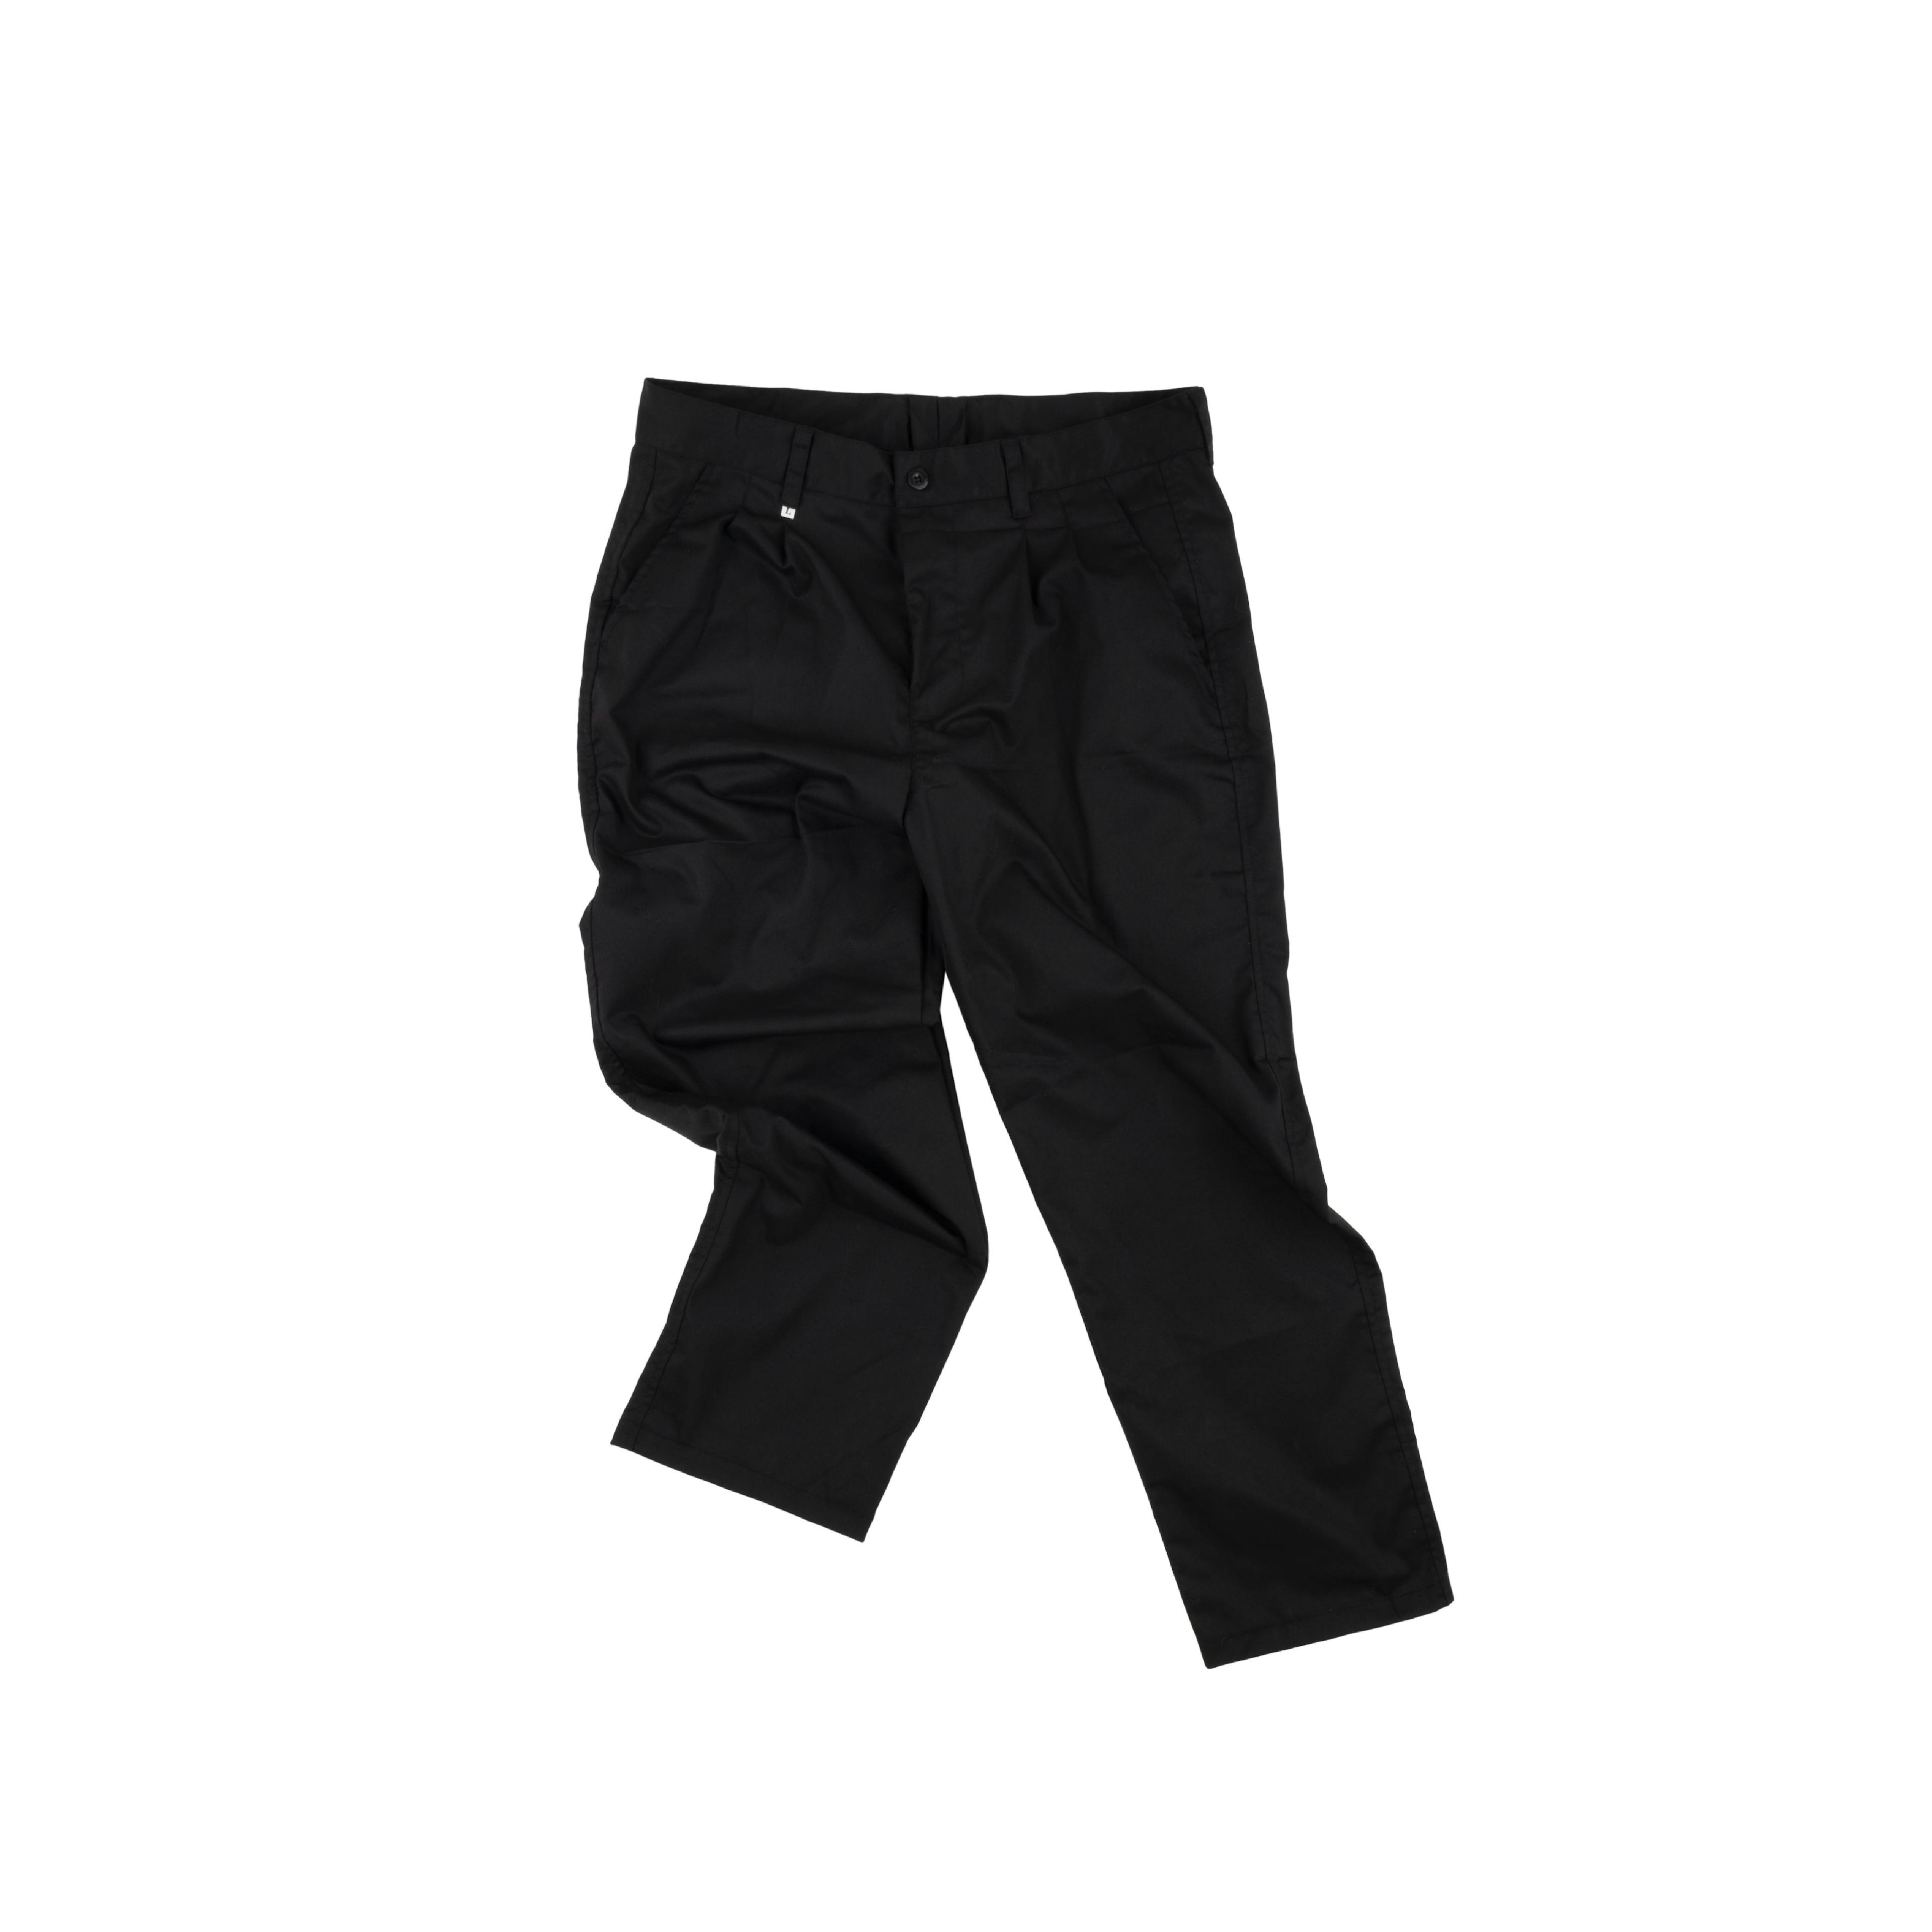 a black work pant = 3 of 5